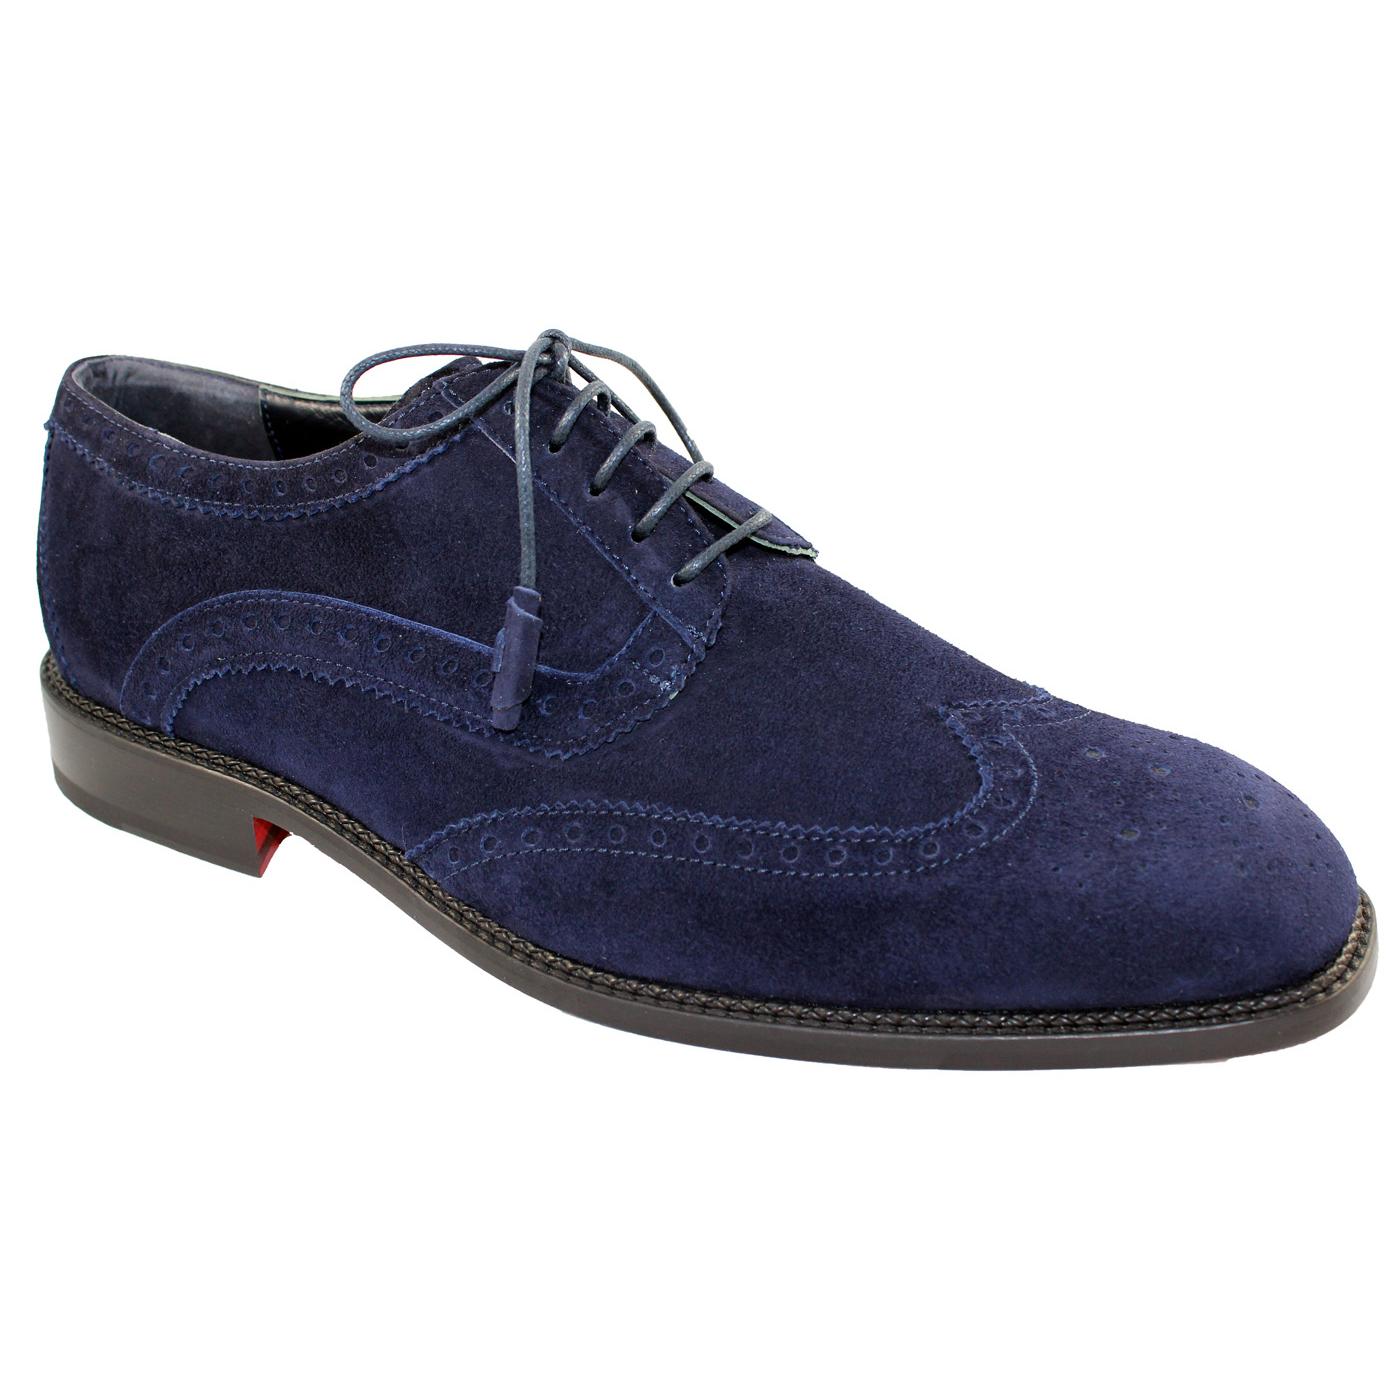 Emilio Franco EF120 Navy Blue Genuine Leather Suede Perforated Lace-Up ...